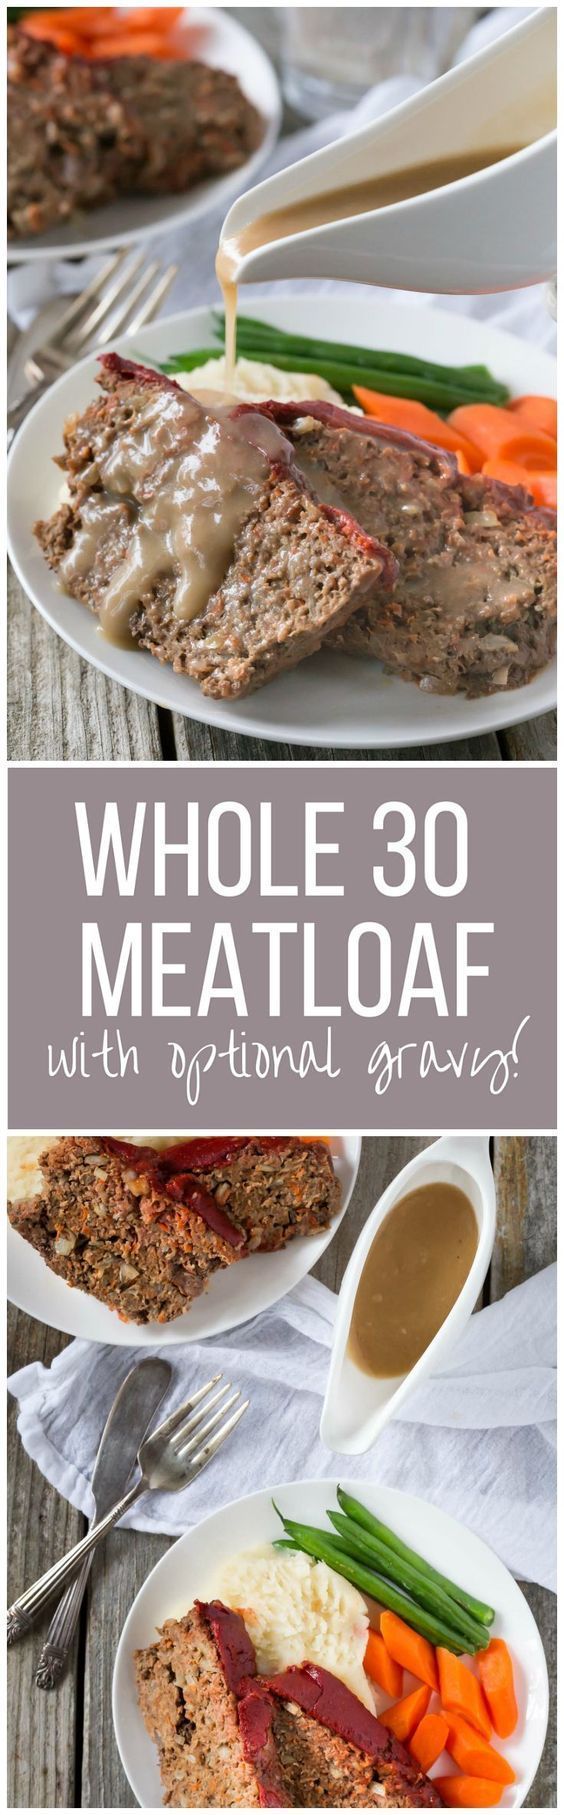 Perfect for a weeknight meal! This gluten free, Paleo and Whole 30 Meatloaf is packed with flavor and added vegetables! Make it